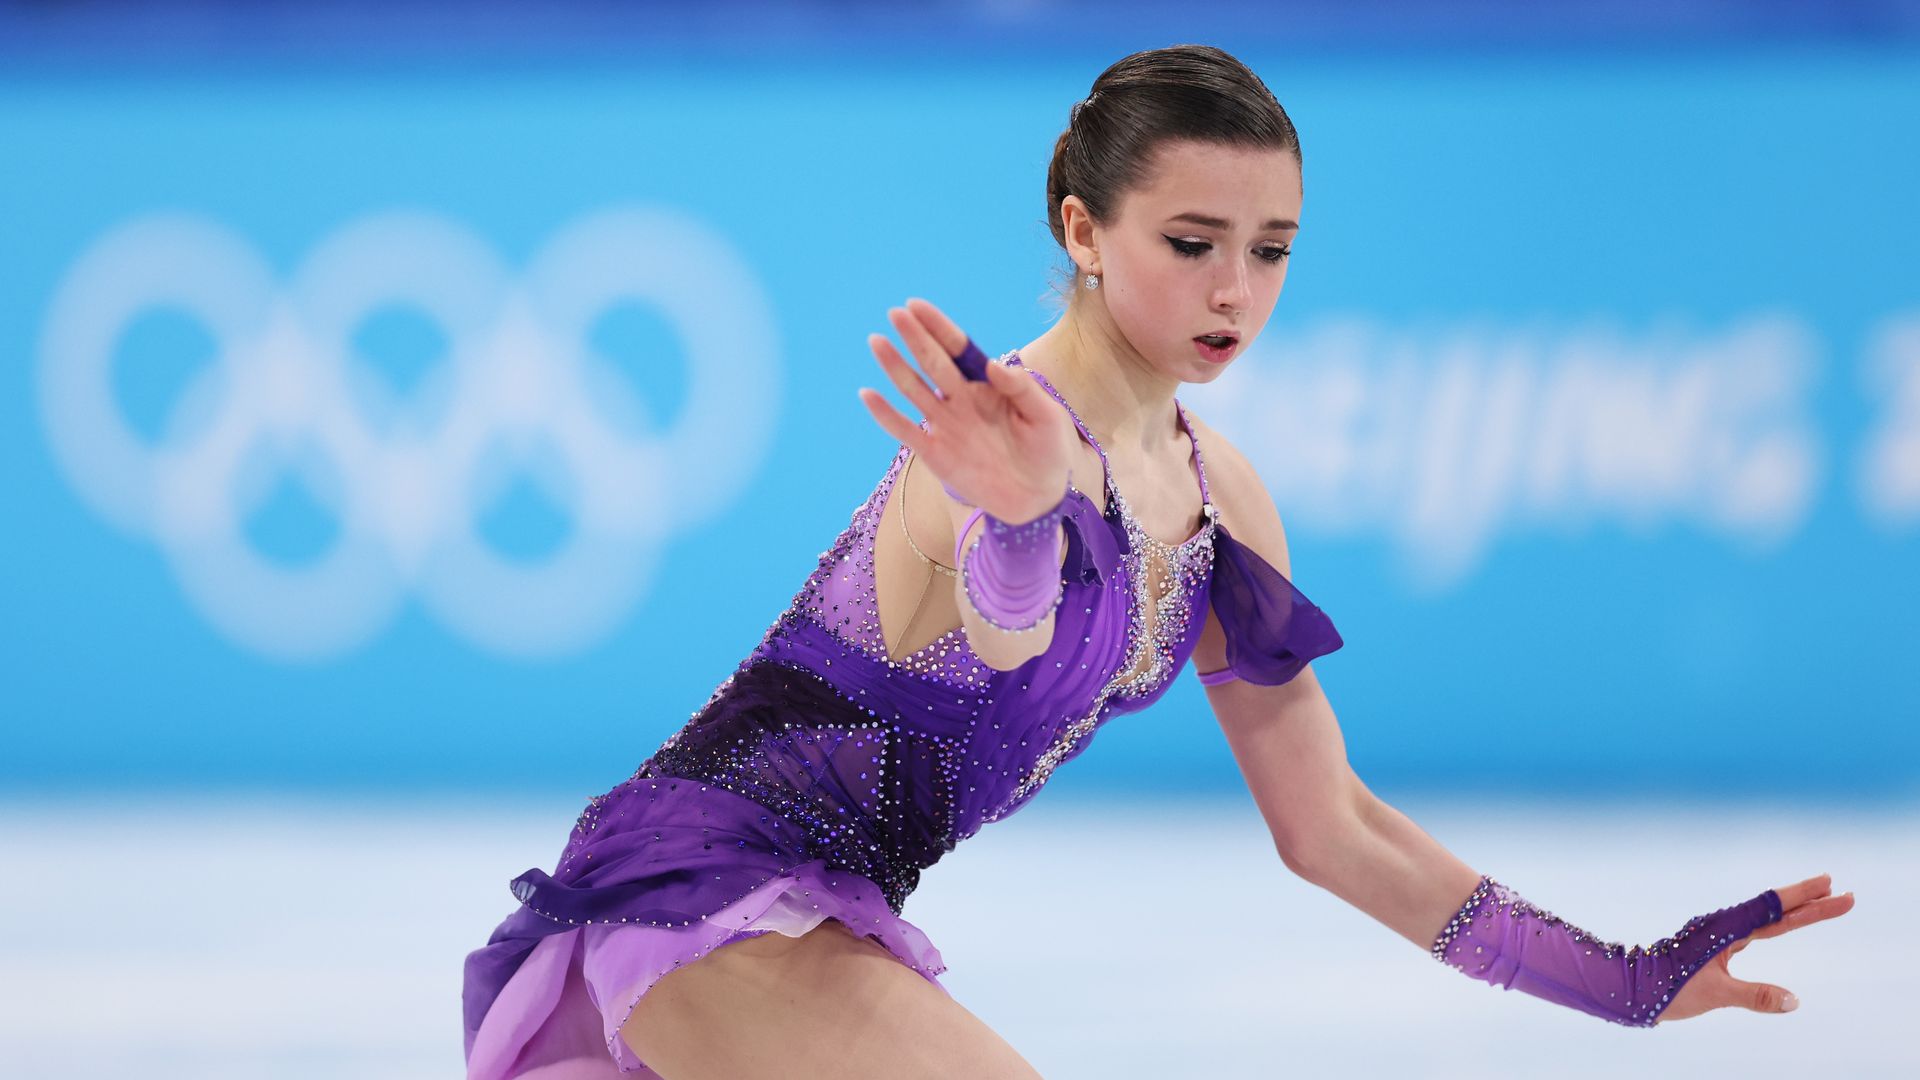 Kamila Valieva of Team ROC skates during the Women Single Skating Short Program on day eleven of the Beijing 2022 Winter Olympic Games at Capital Indoor Stadium on February 15, 2022 in Beijing, China.